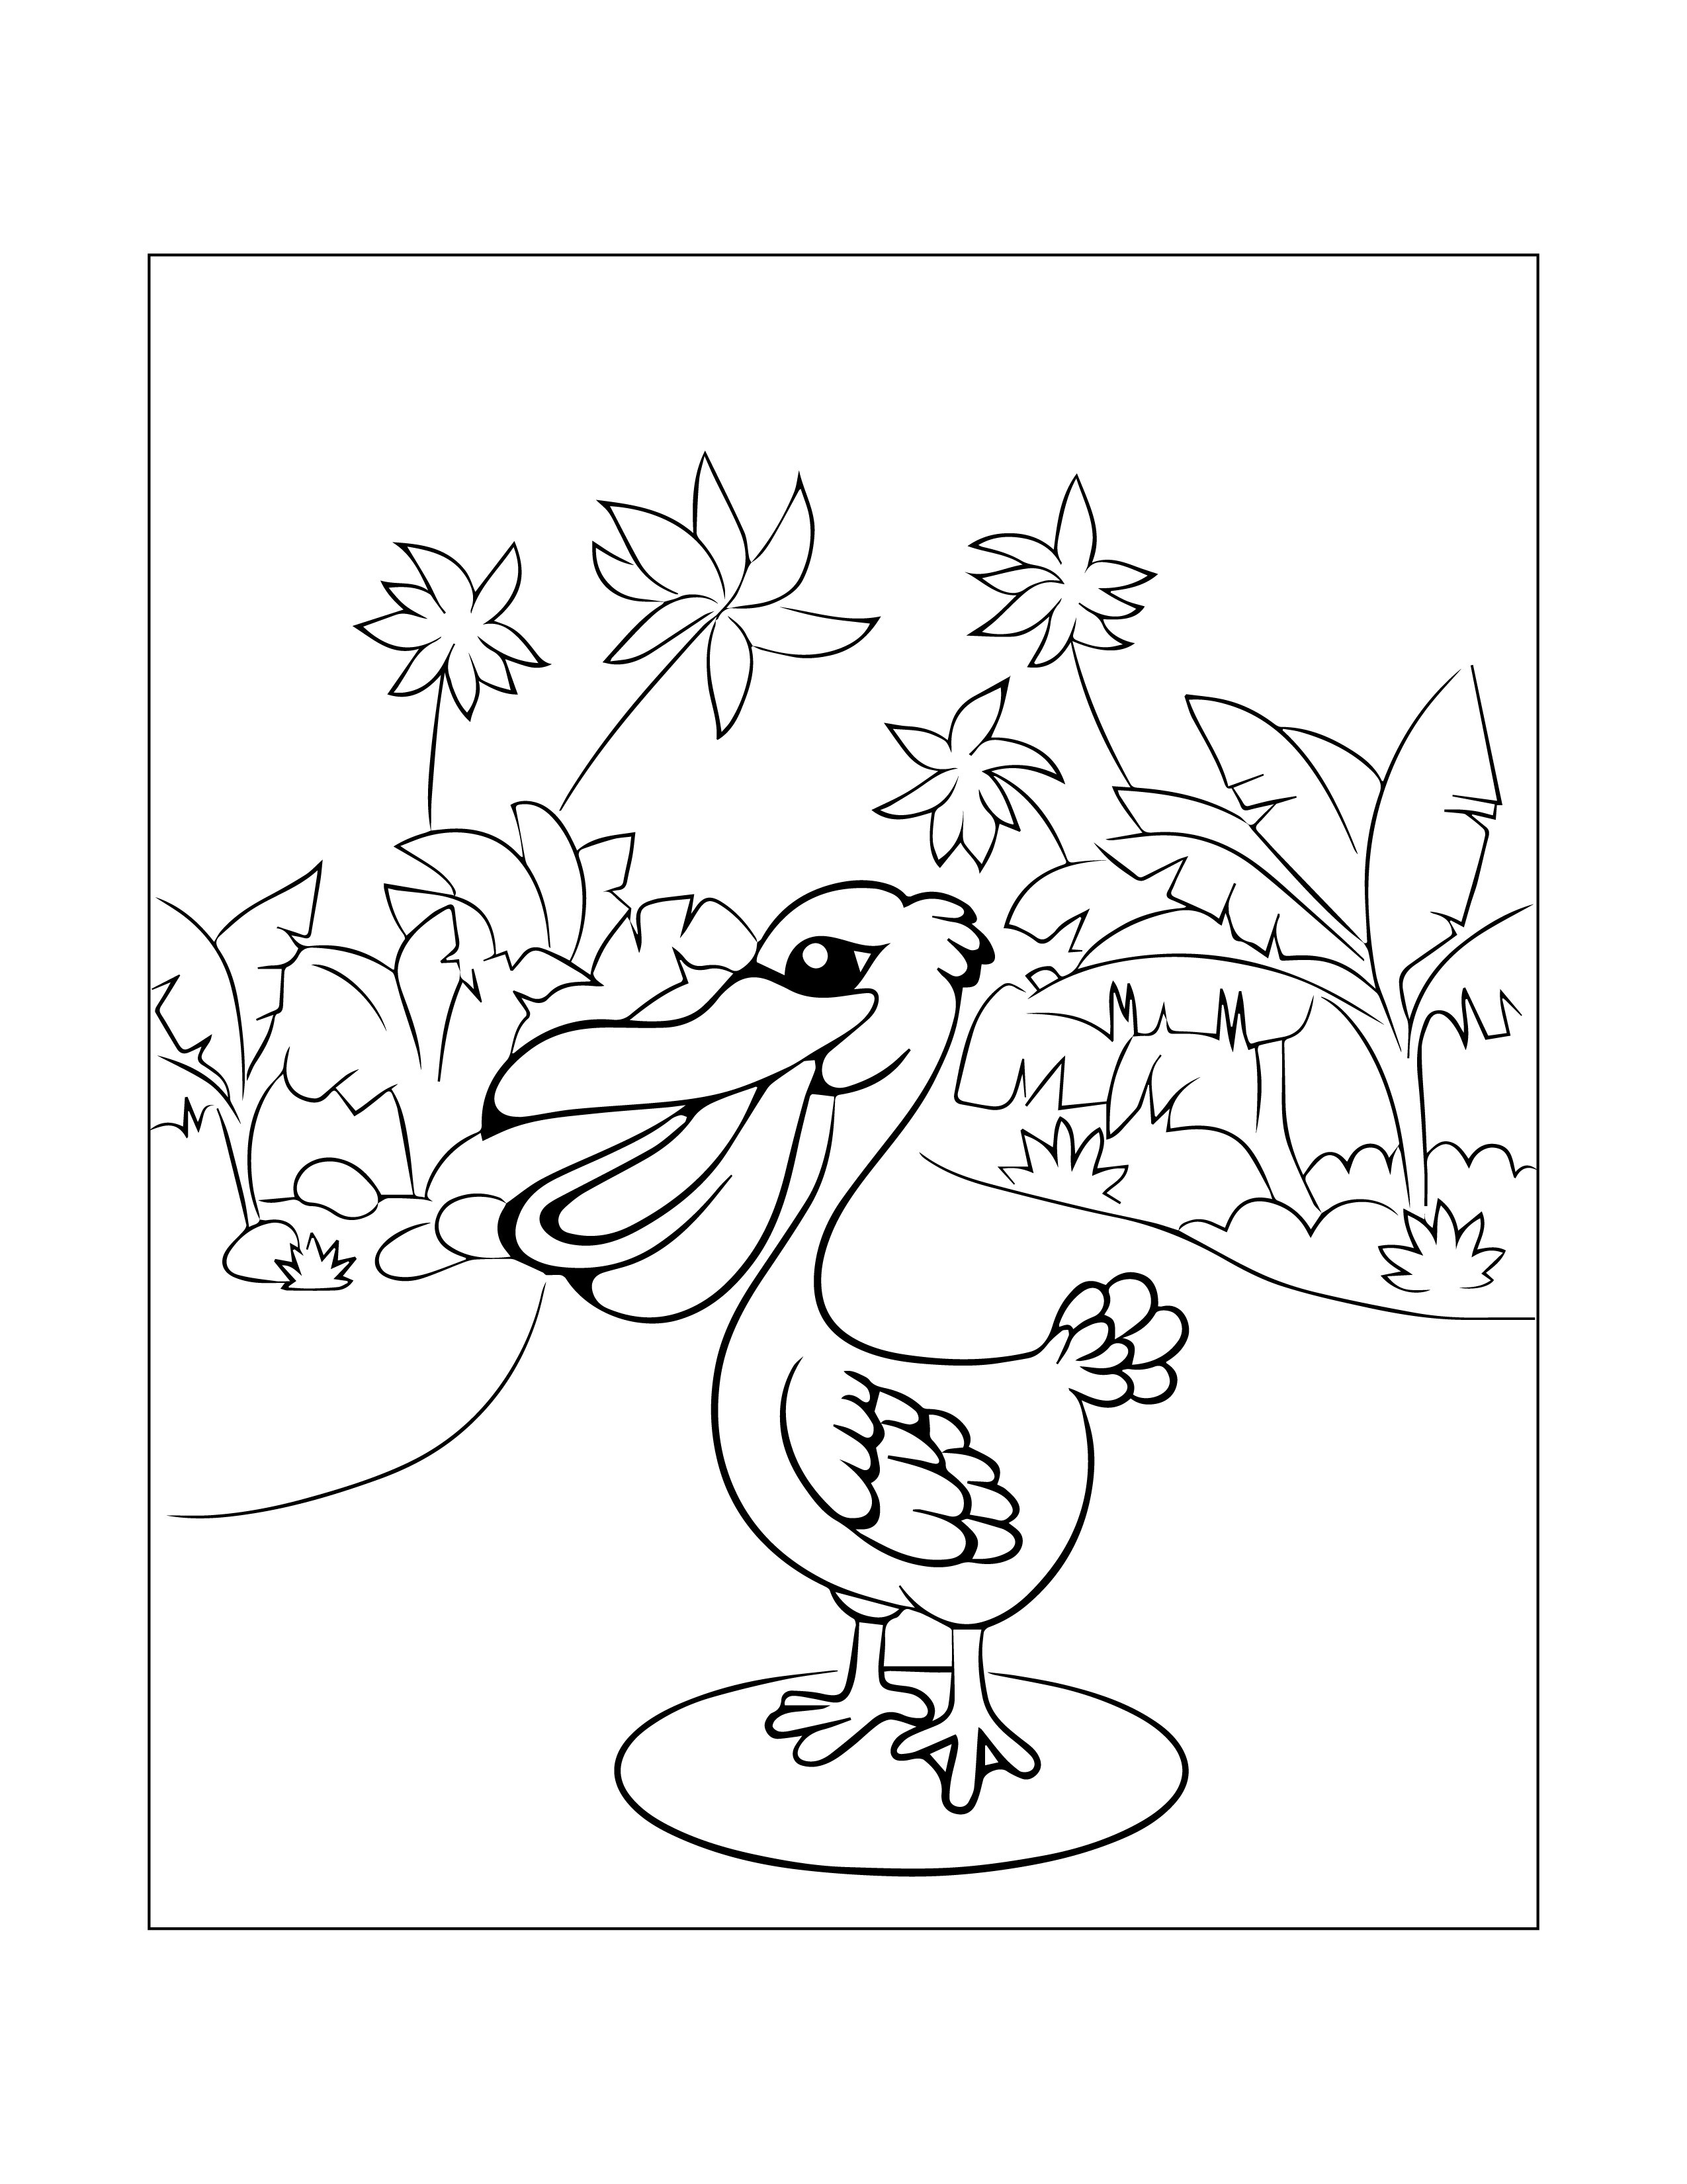 Pelican coloring page for children